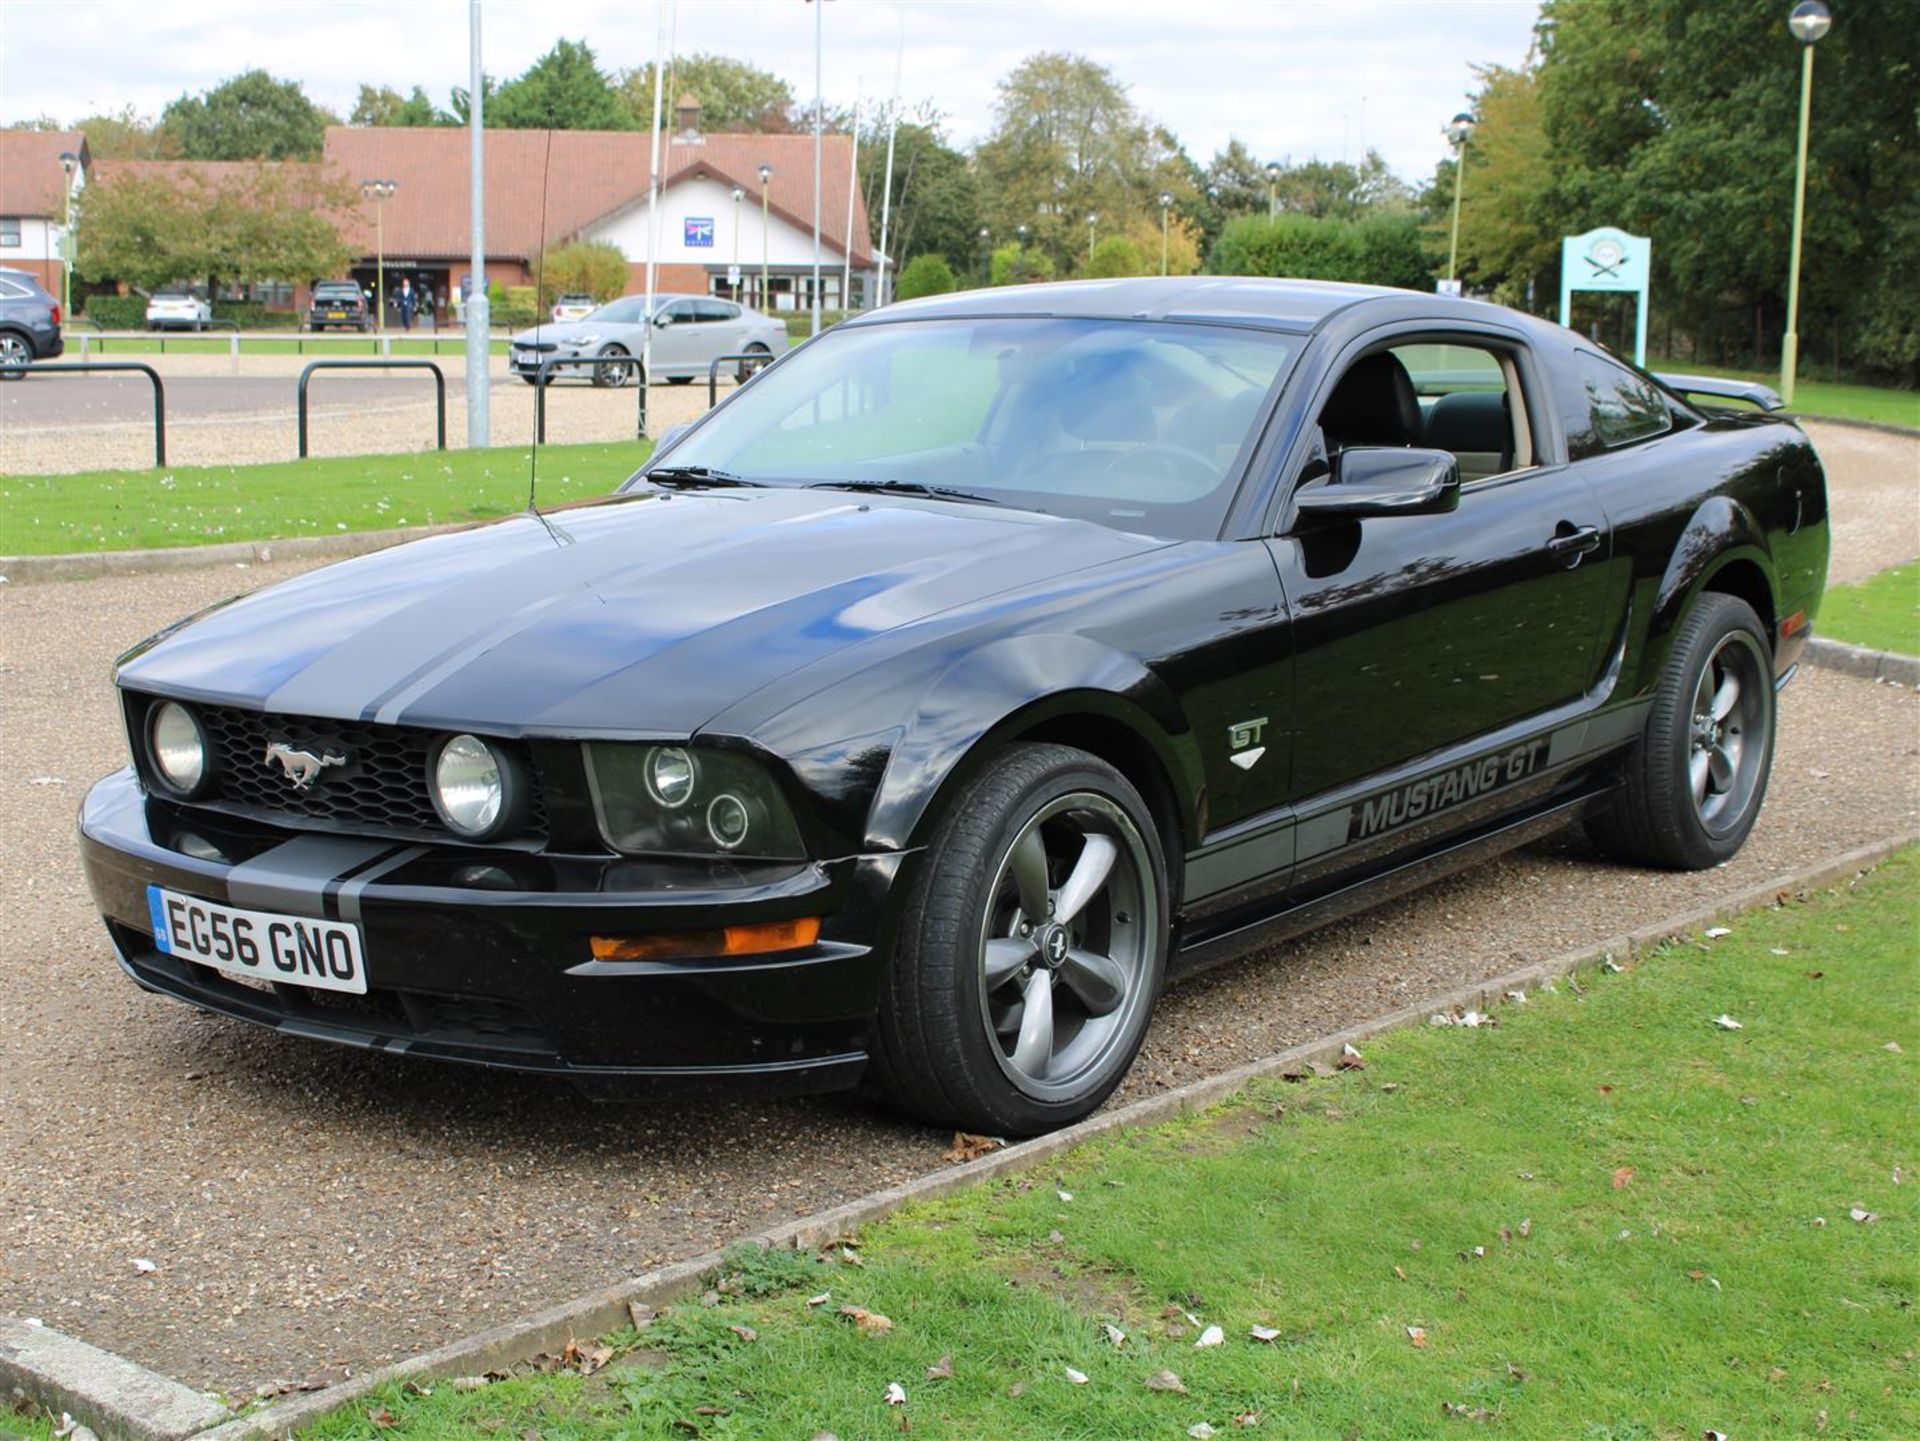 2007 Ford Mustang 4.6 V8 GT LHD - Image 11 of 23